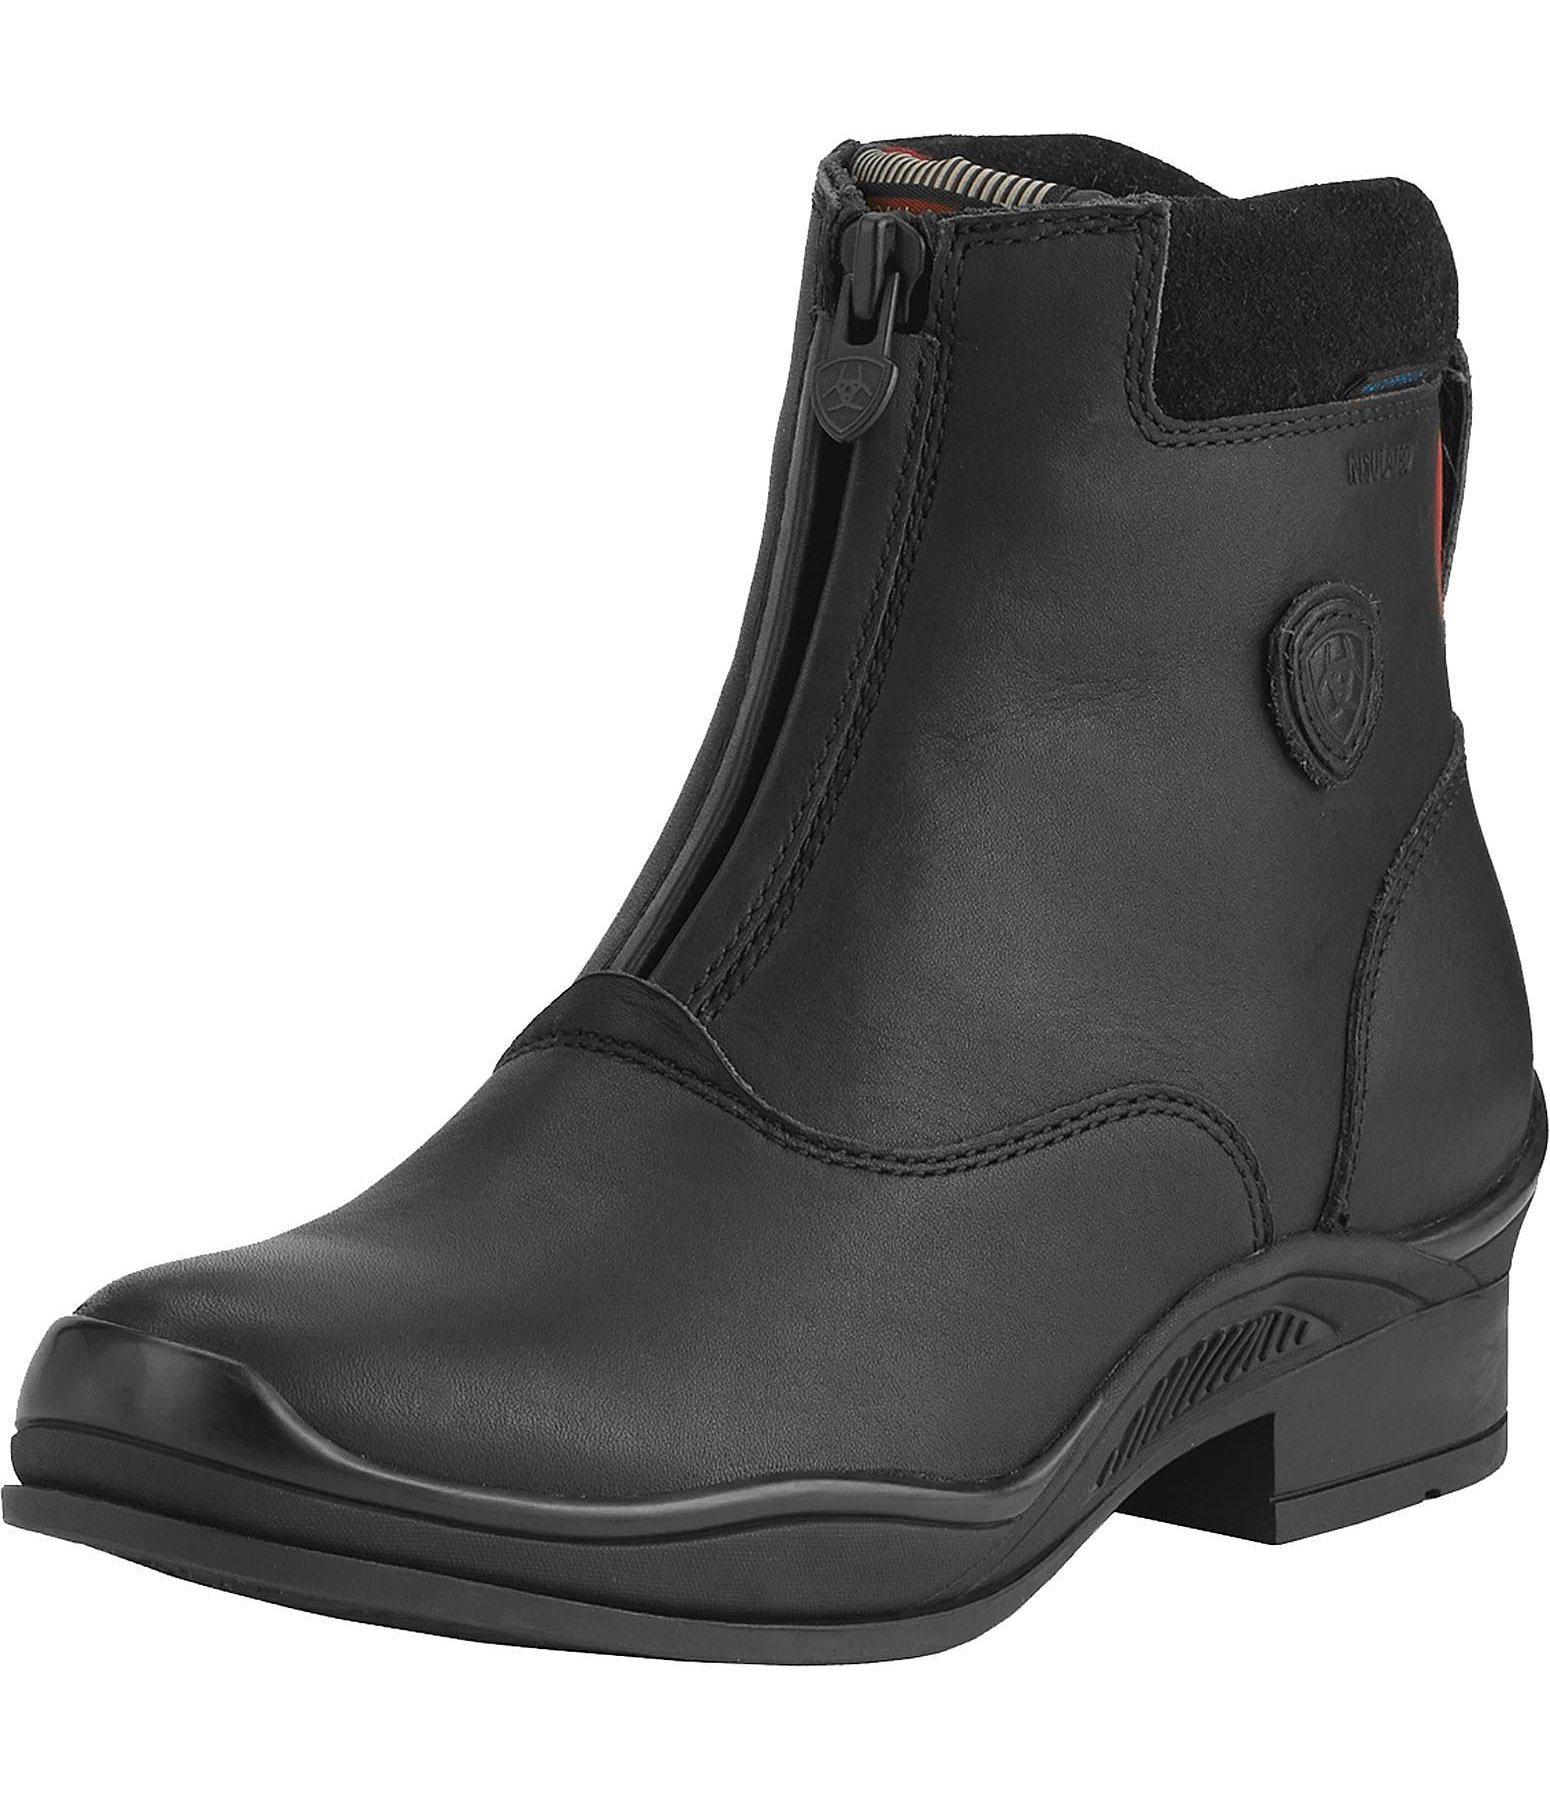 Extreme ZIP Paddock H20 Insulated - ARIAT Boots - Kramer Equestrian